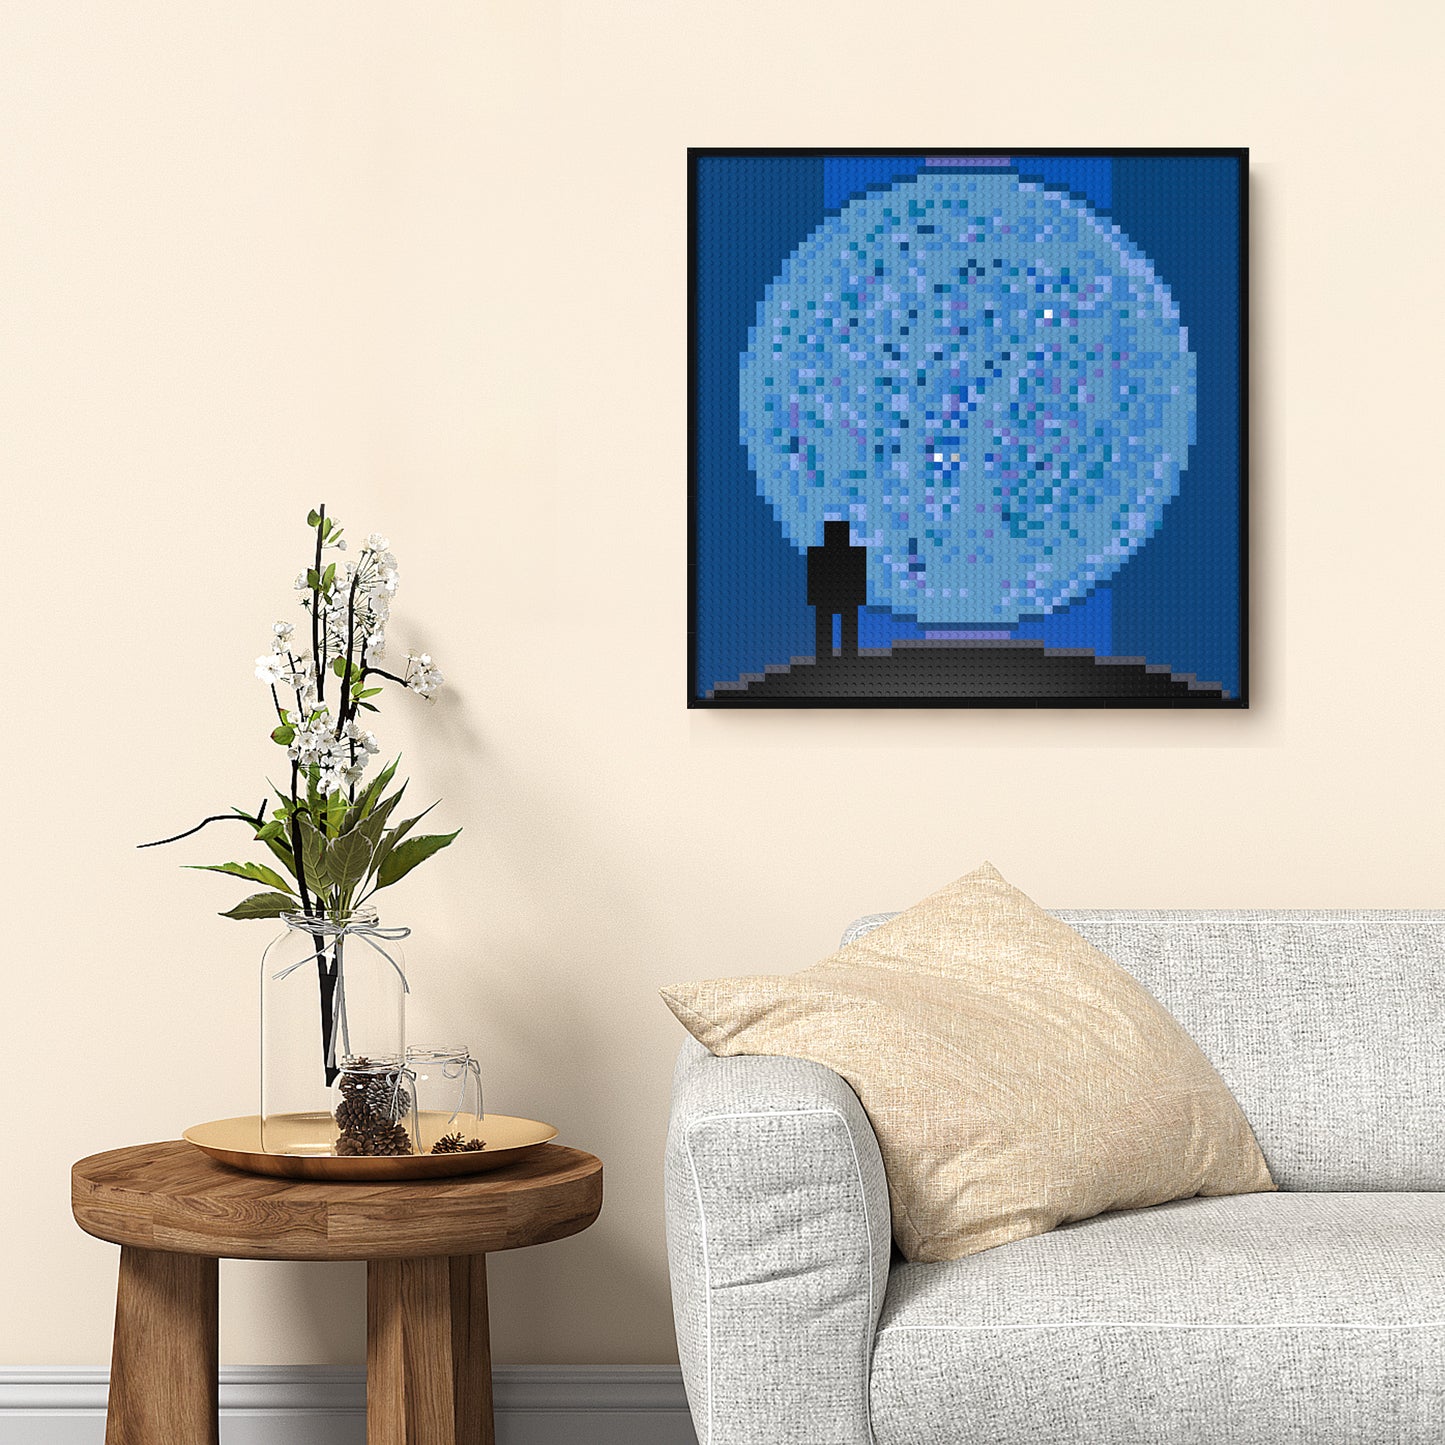 Gazing at the Starry Sky Compatible LEGO Artwork (64*64 dots, Assembled Frame)